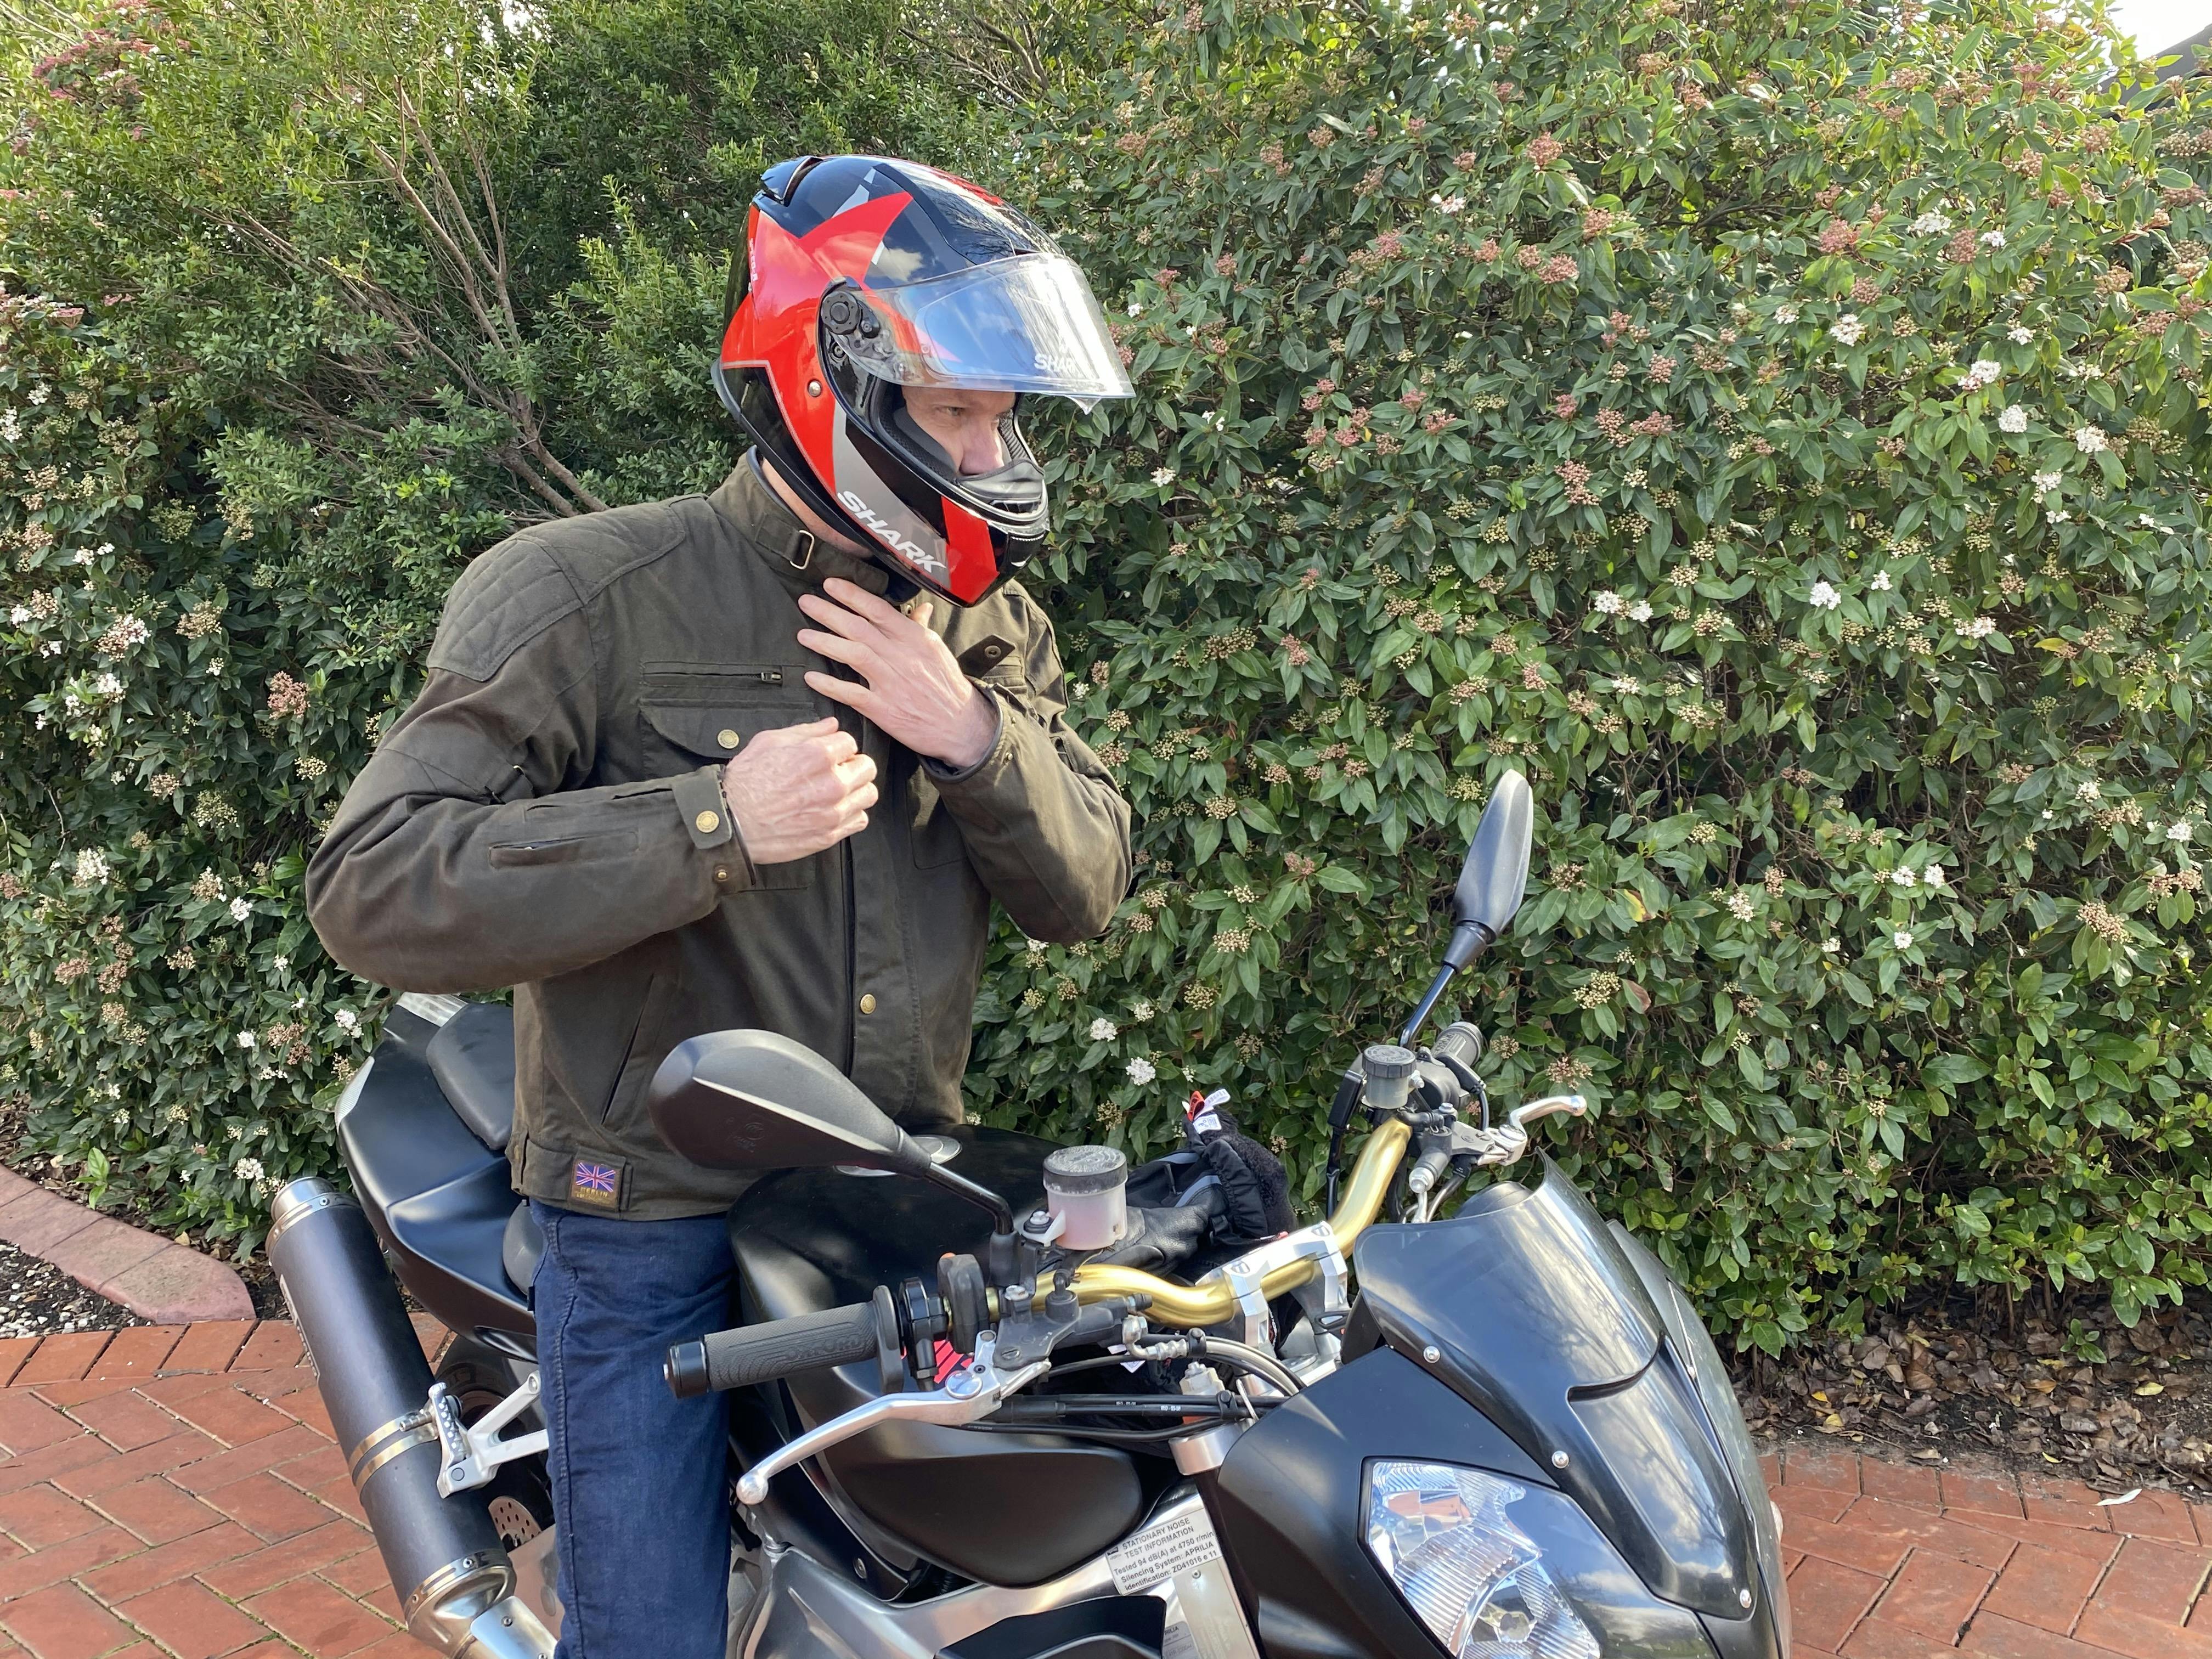 Man wearing the wax cotton Barton jacket by Merlin on a motorcycle with a red helmet